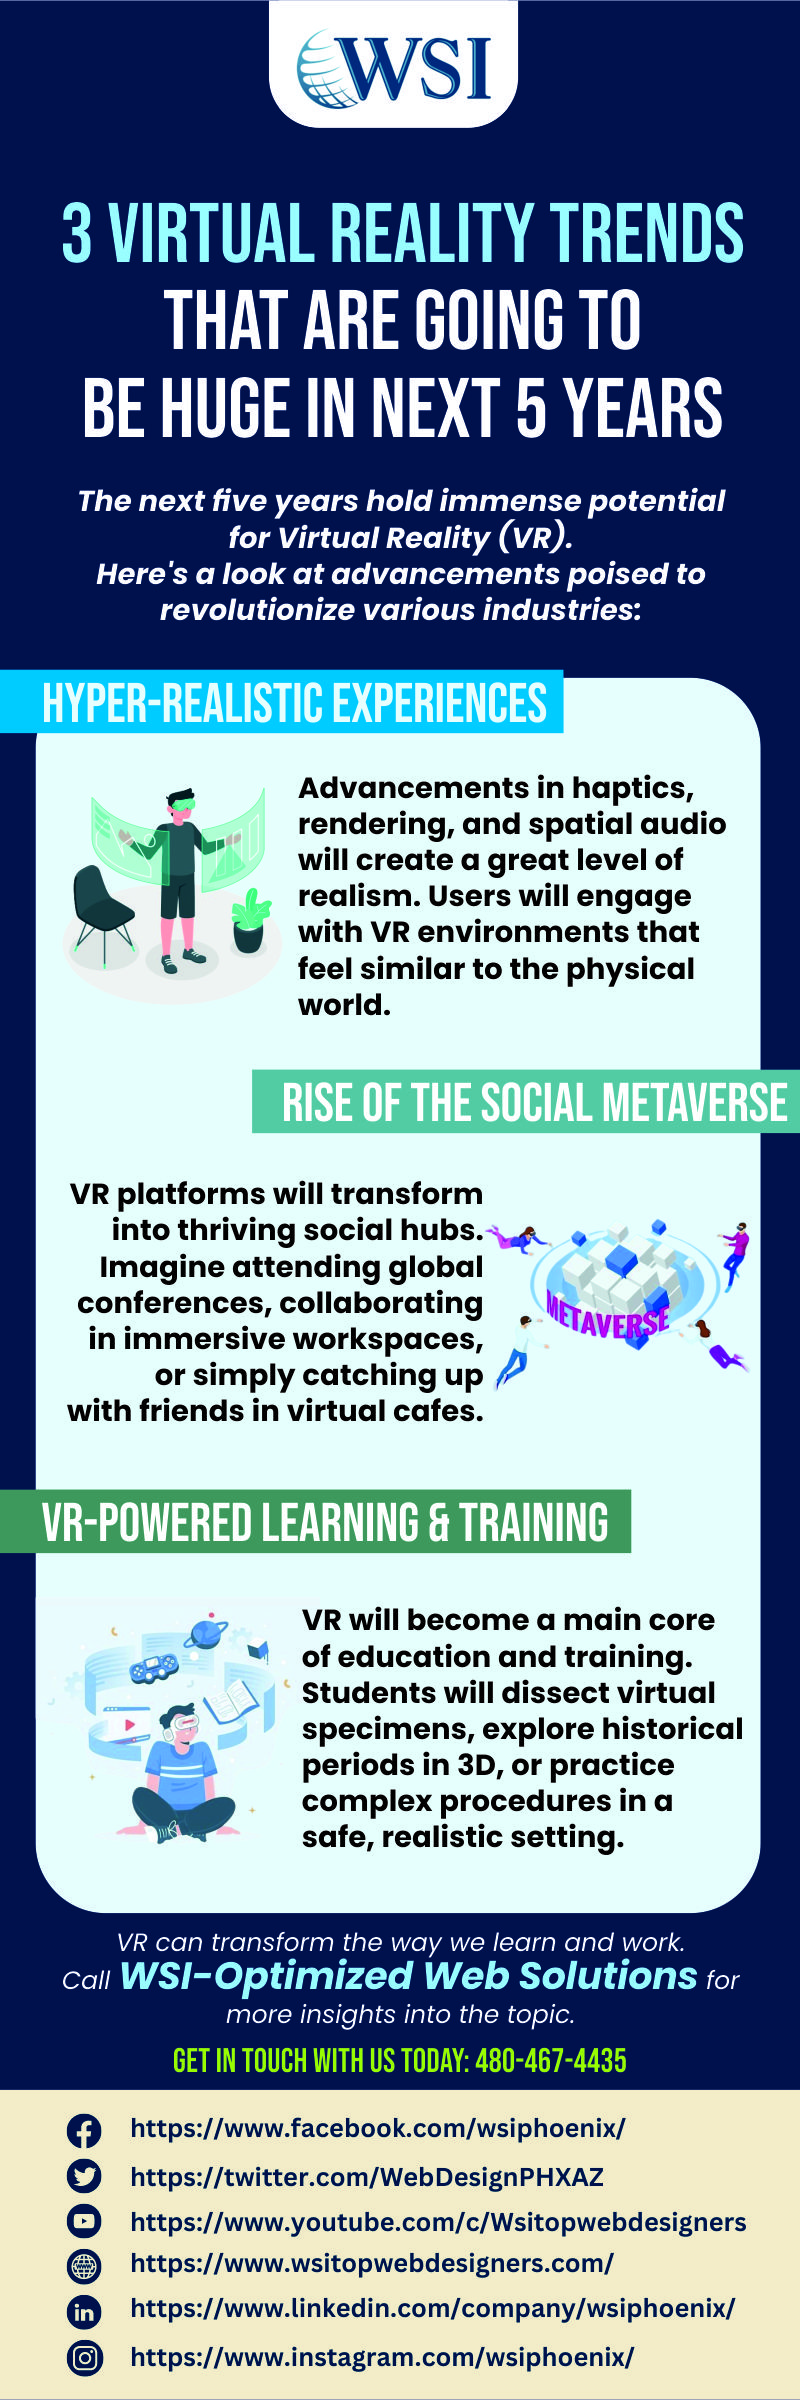 3 Virtual Reality Trends that are Going to be Huge in Next 5 Years - Social Social Social | Social Social Social